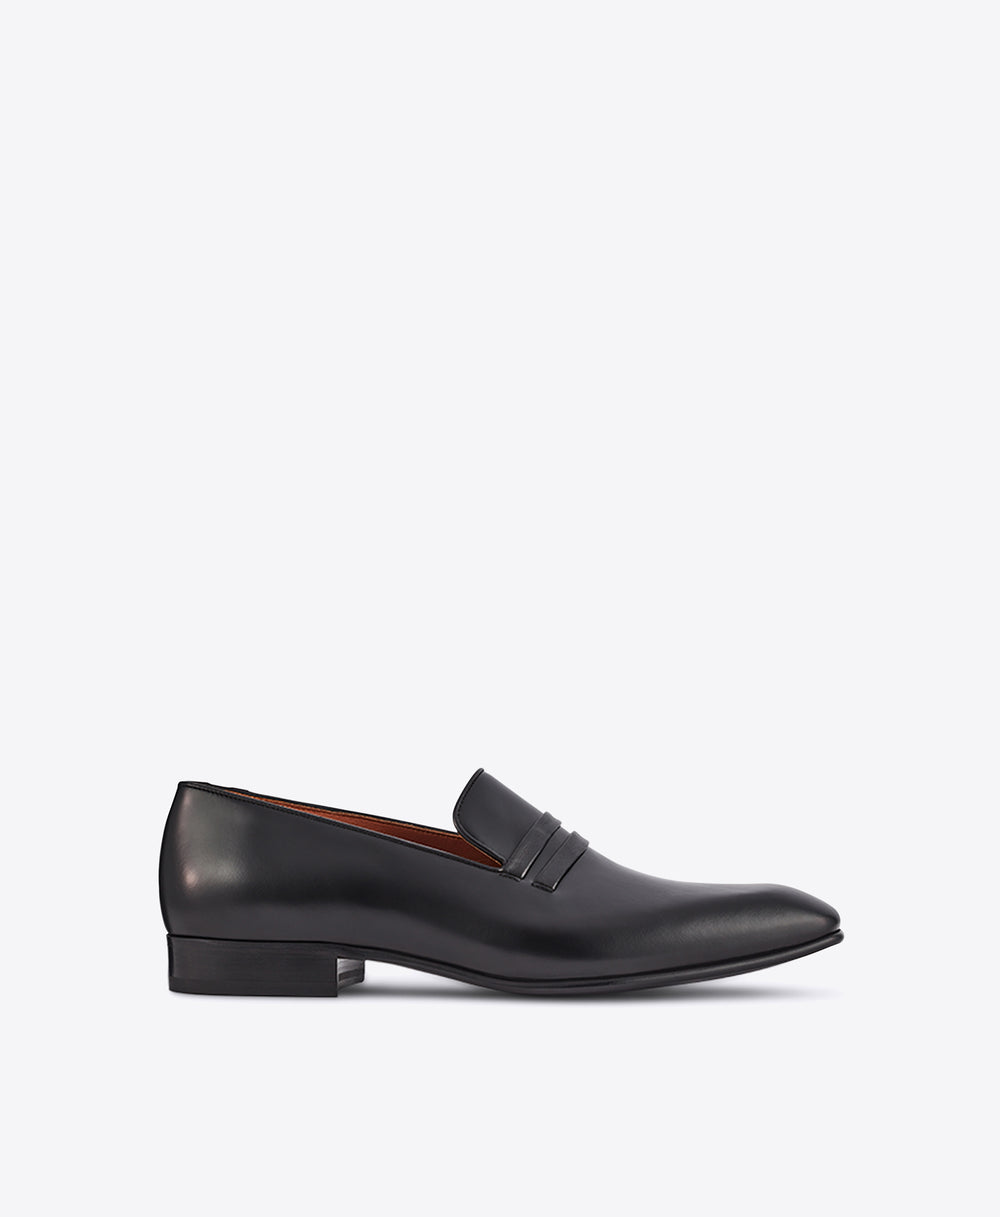 Men's Black Leather Loafers Malone Souliers